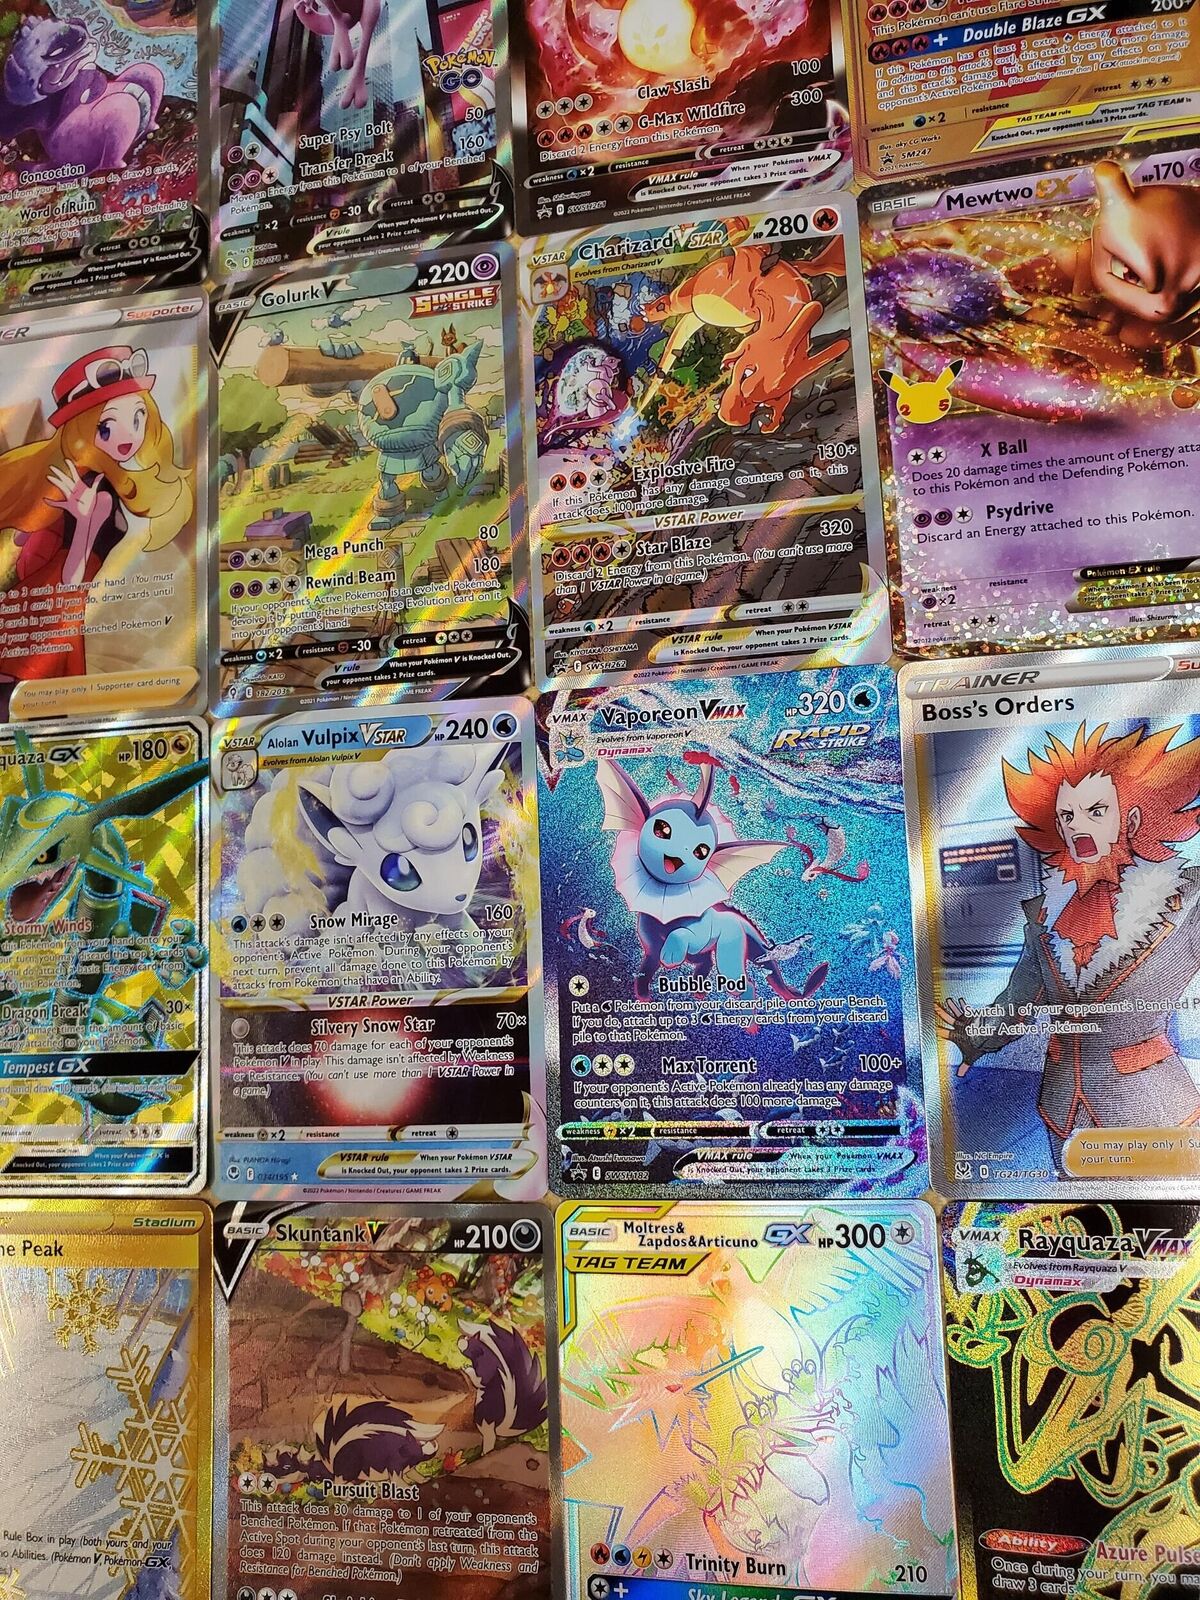 POKEMON CARD LOT - 100 OFFICAL TRADING CARDS - NO ENERGY CARDS - ULTRA RARE